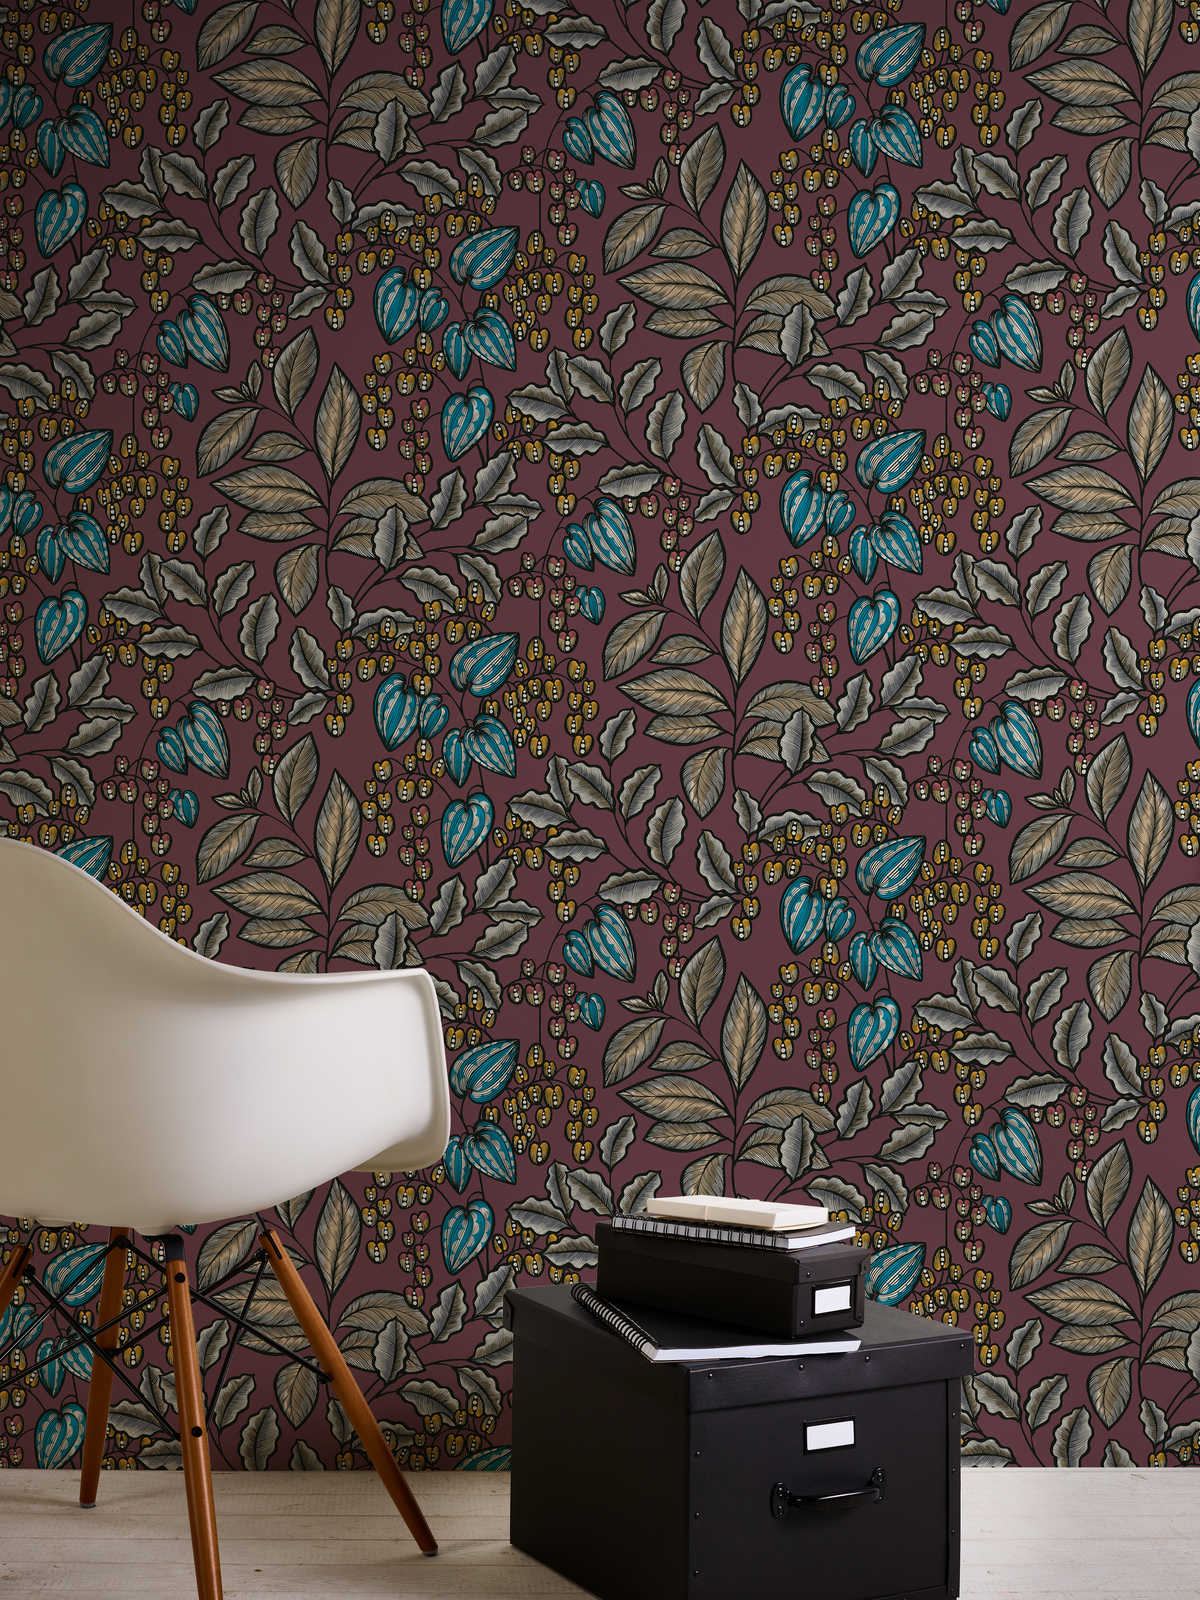             Floral wallpaper purple with leaves print in Scandinavian style
        